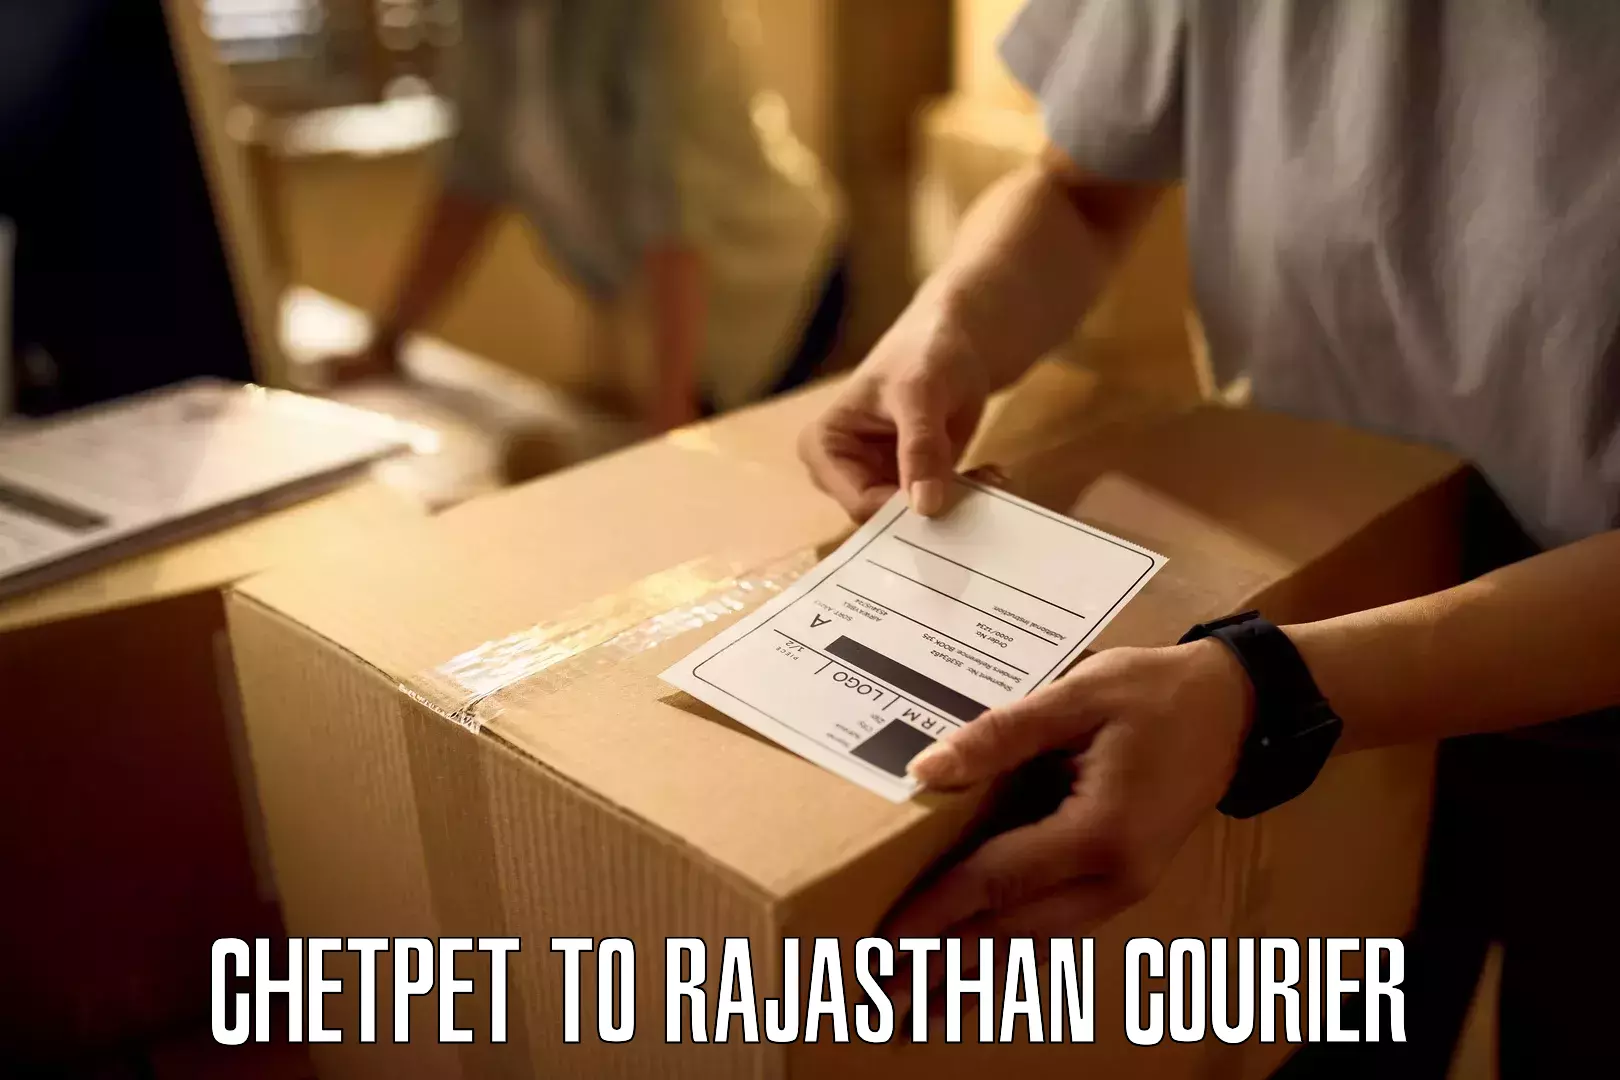 Easy return solutions Chetpet to Rajasthan